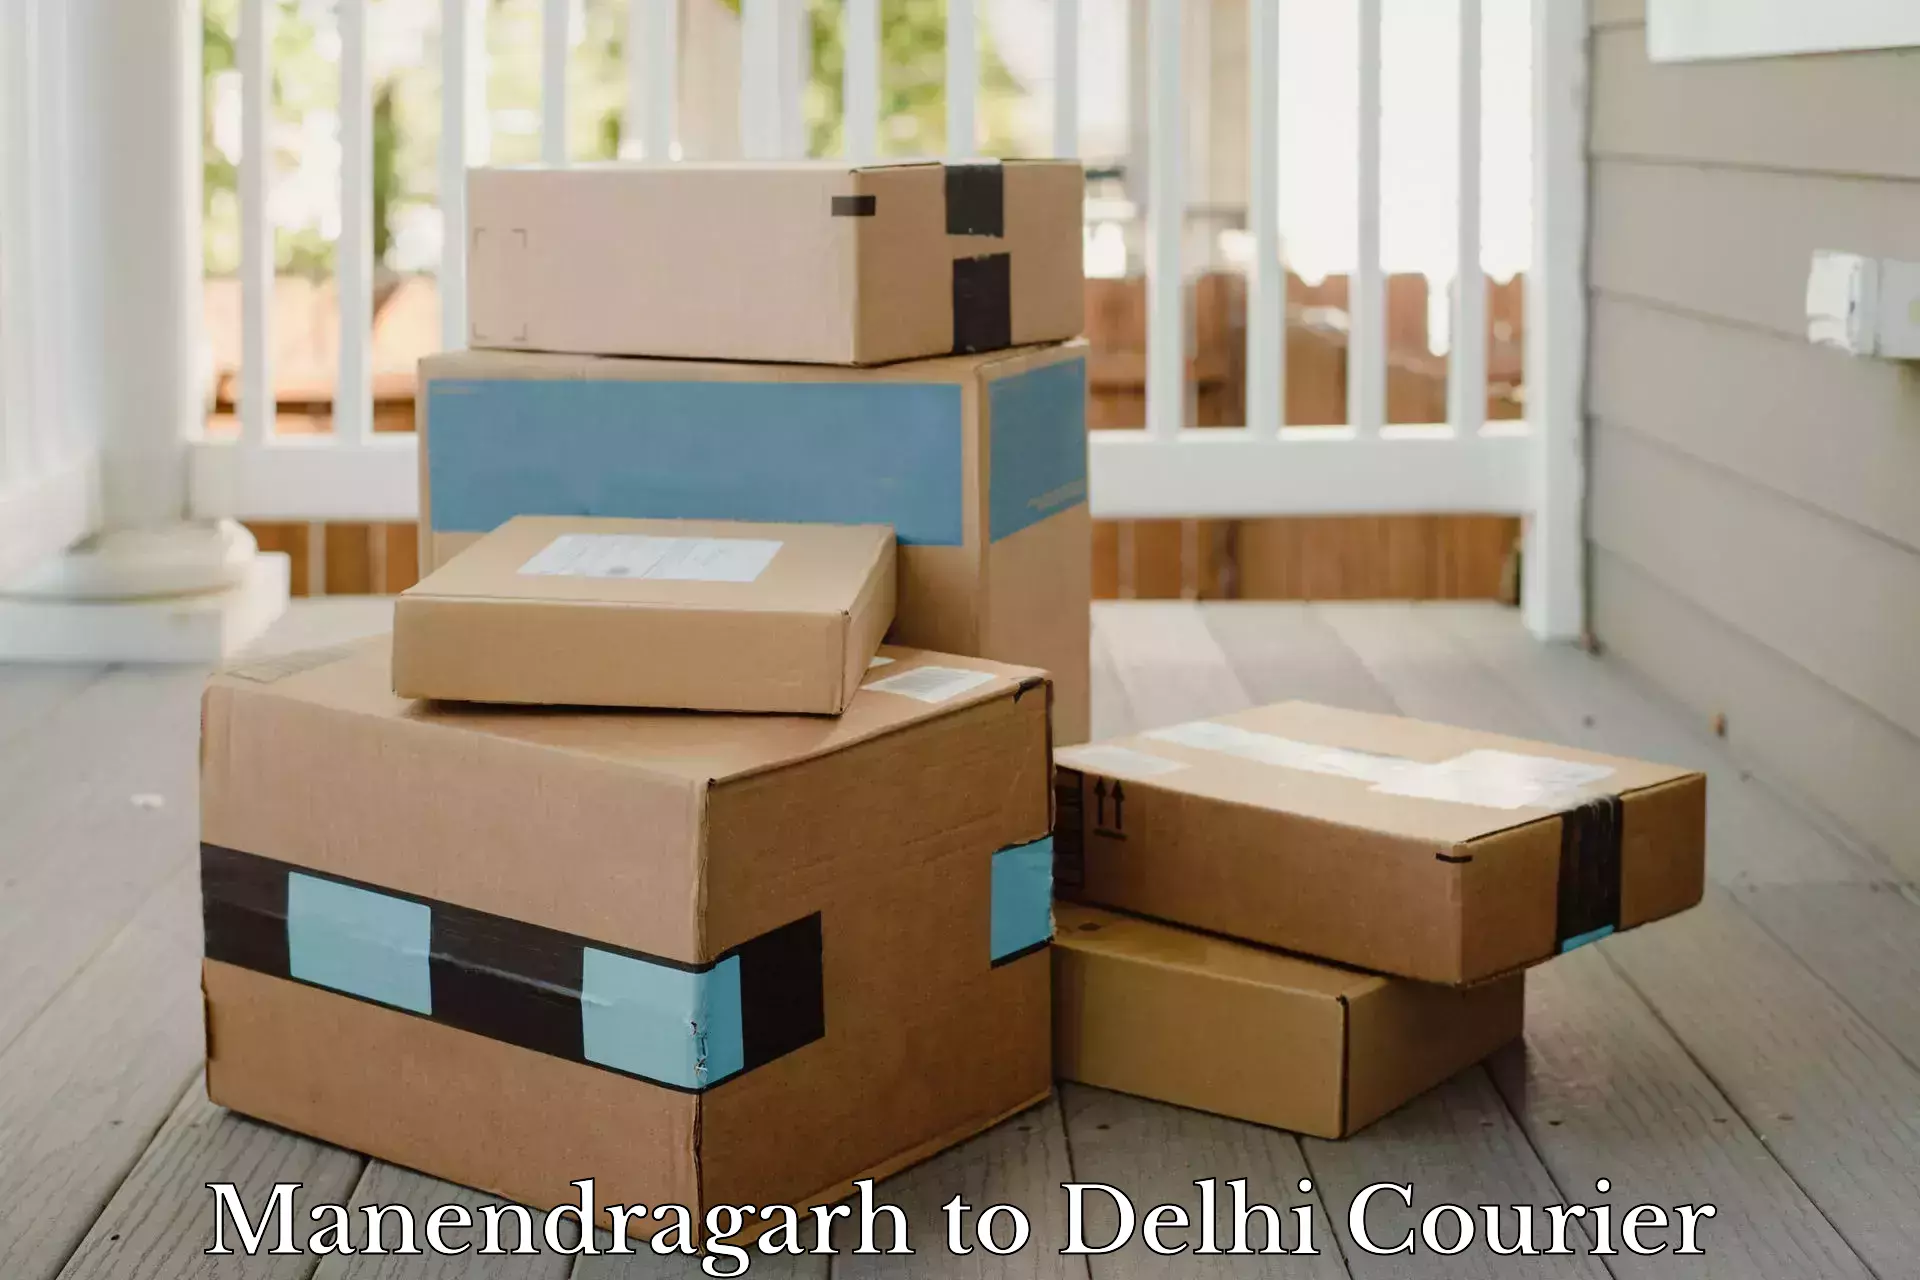 State-of-the-art courier technology Manendragarh to Burari